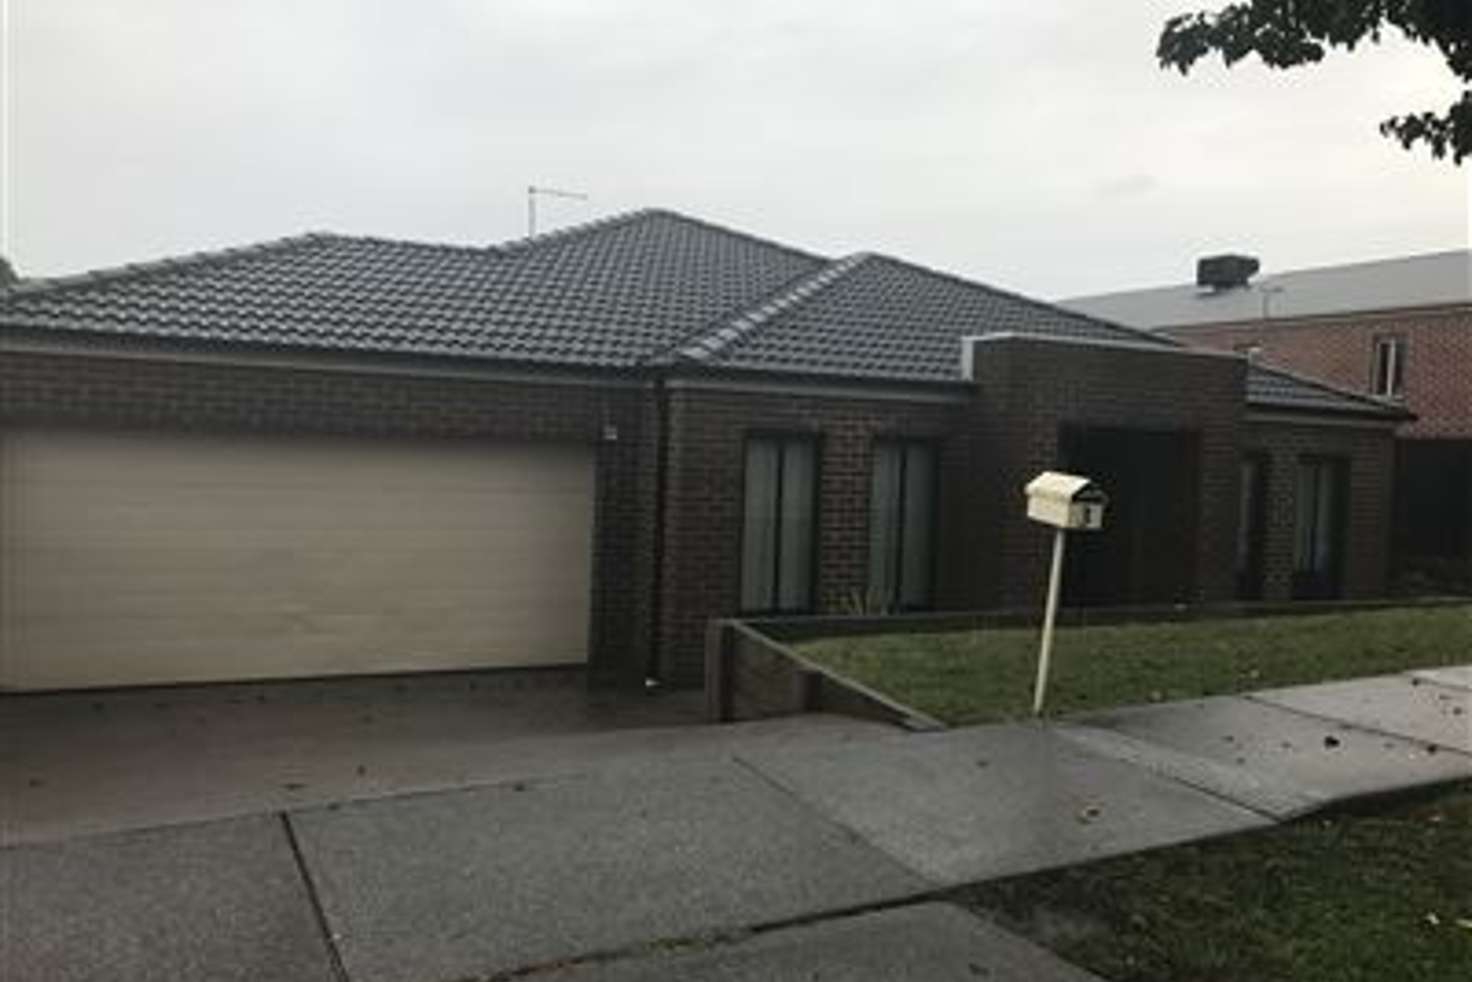 Main view of Homely house listing, 3 Ridgemont Drive, Berwick VIC 3806